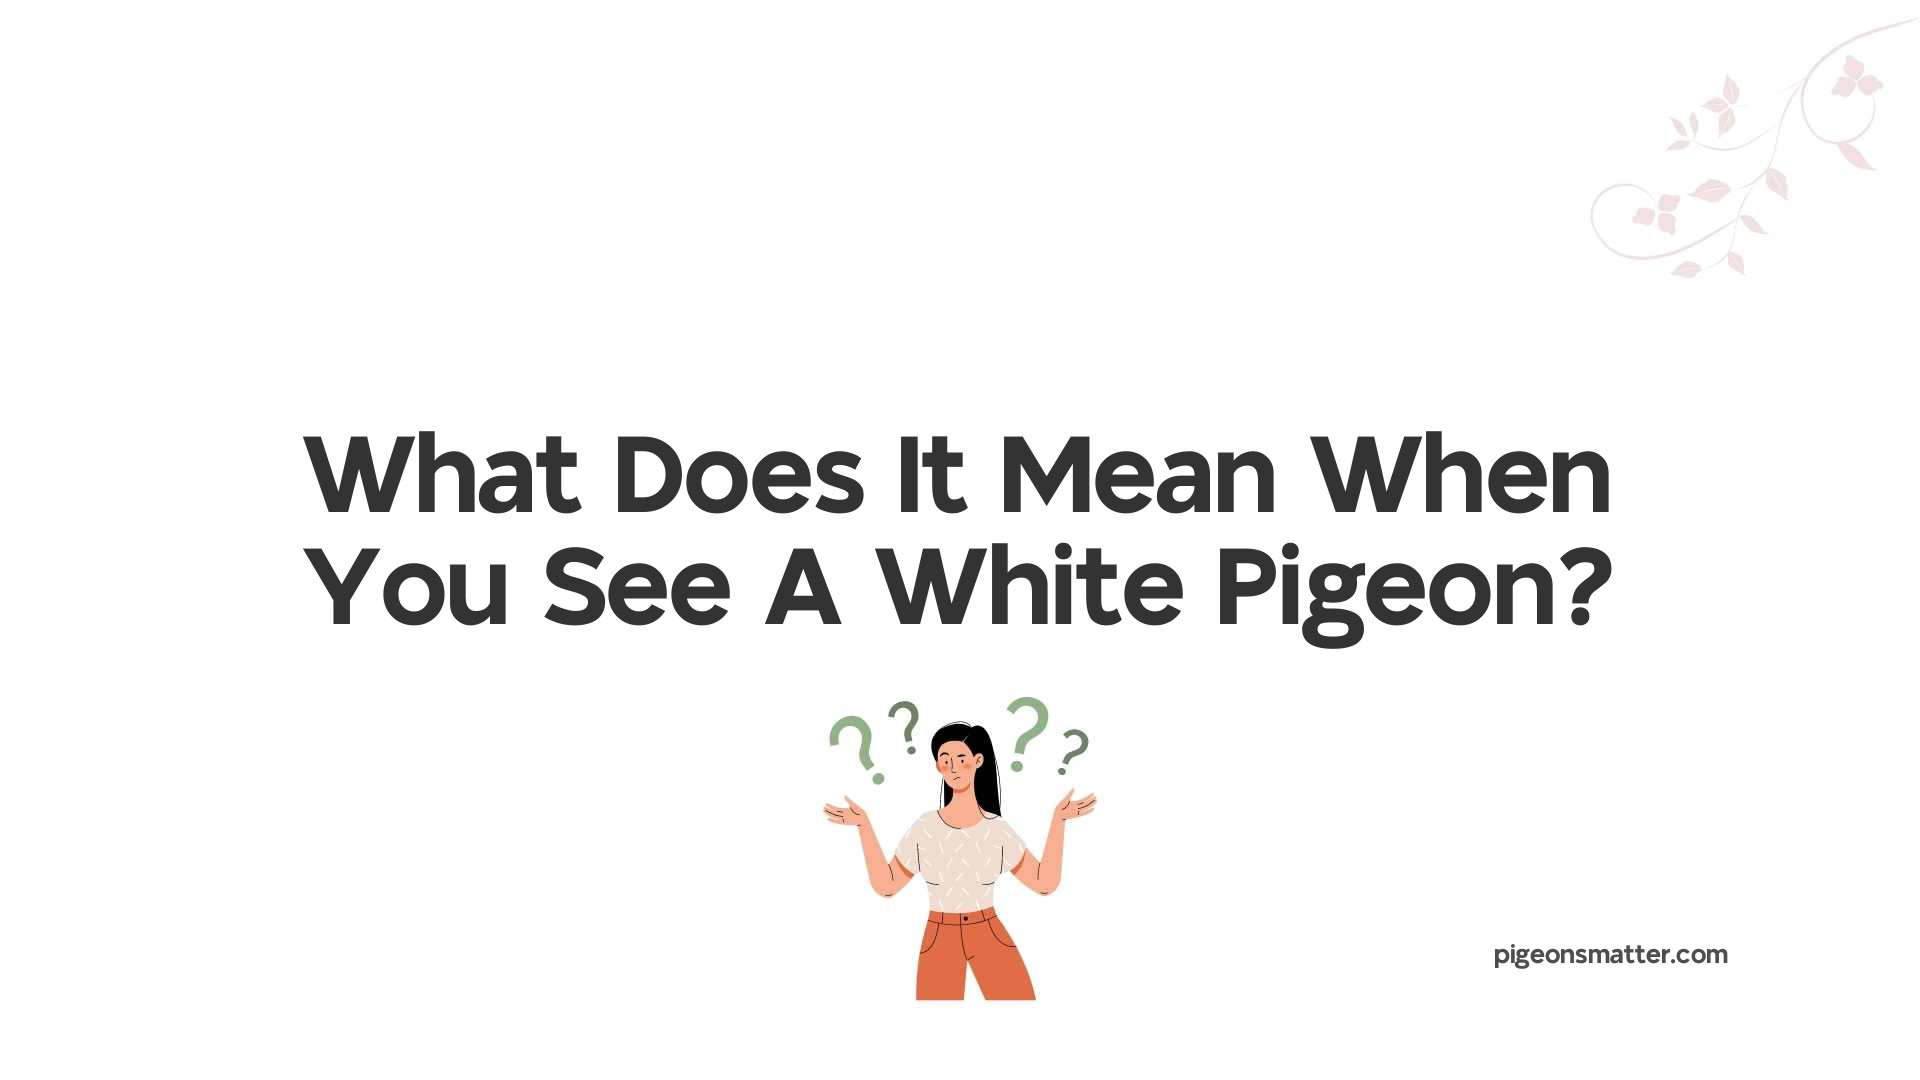 What Does It Mean When You See A White Pigeon?